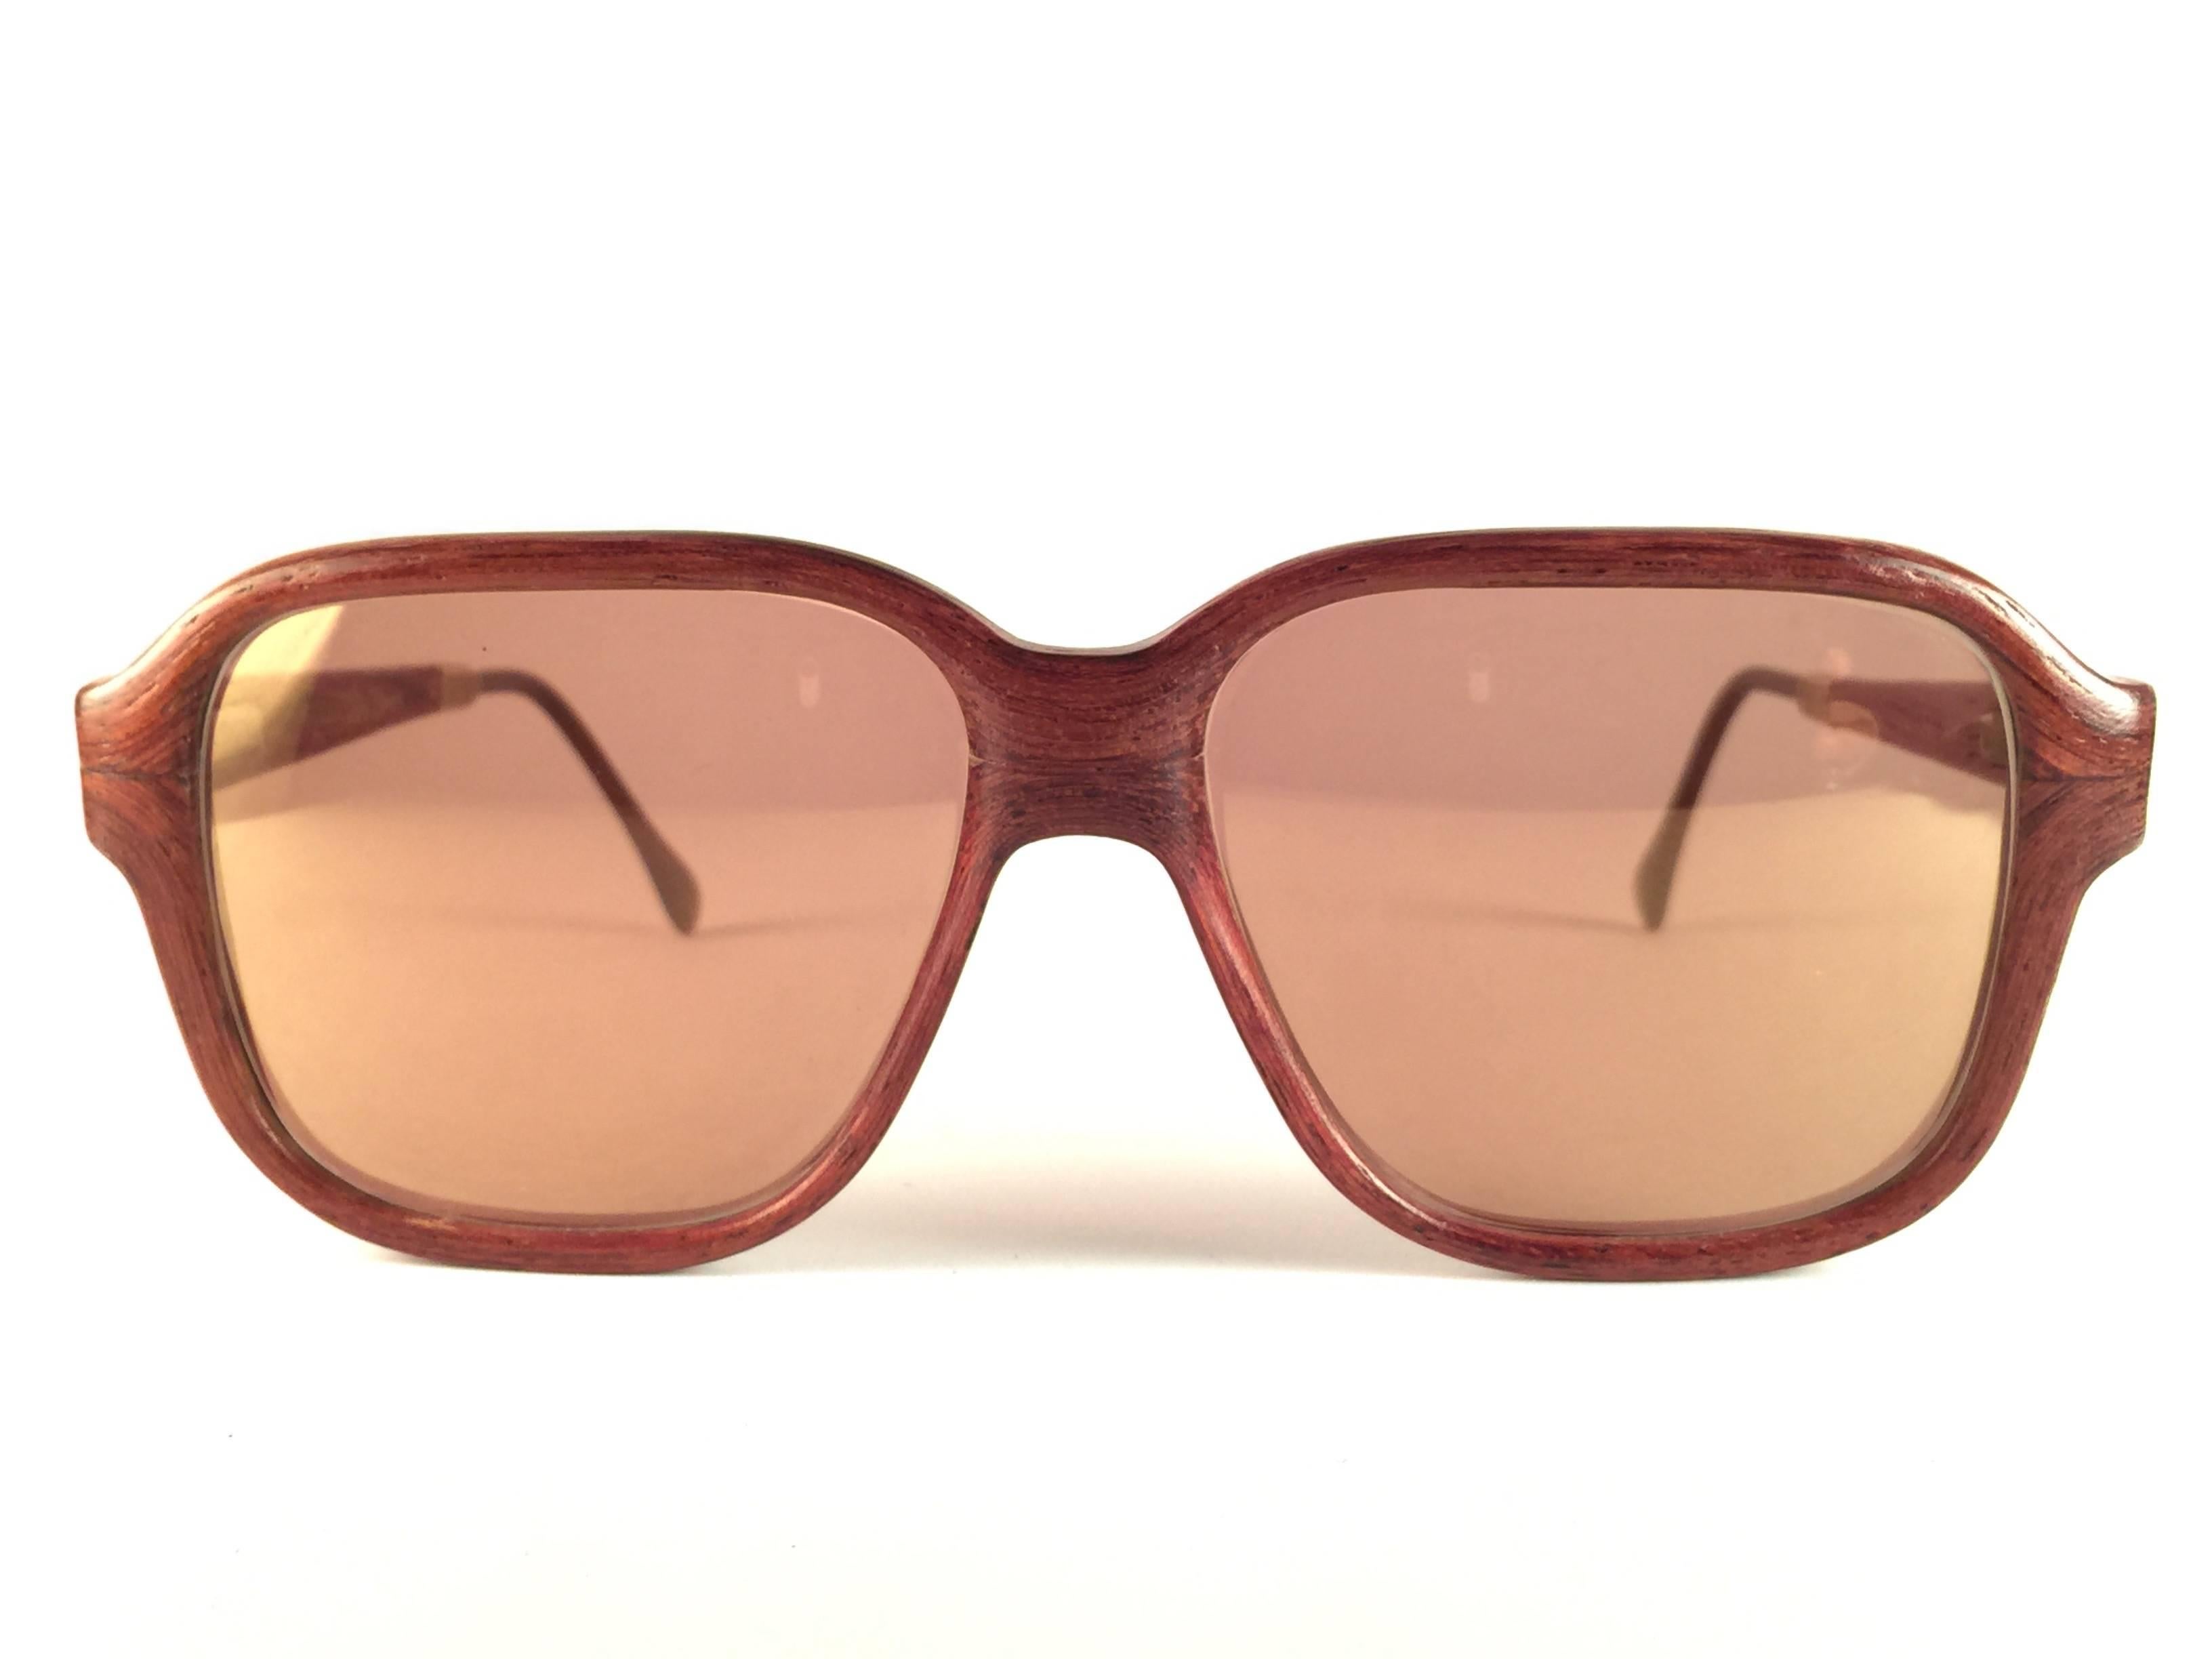 New Vintage Wood Look Paris genuine wood frame holding a pair of gold mirror lenses. 

New, never worn or displayed. This pair may have minor sign of wear due to storage. 

Made in France.